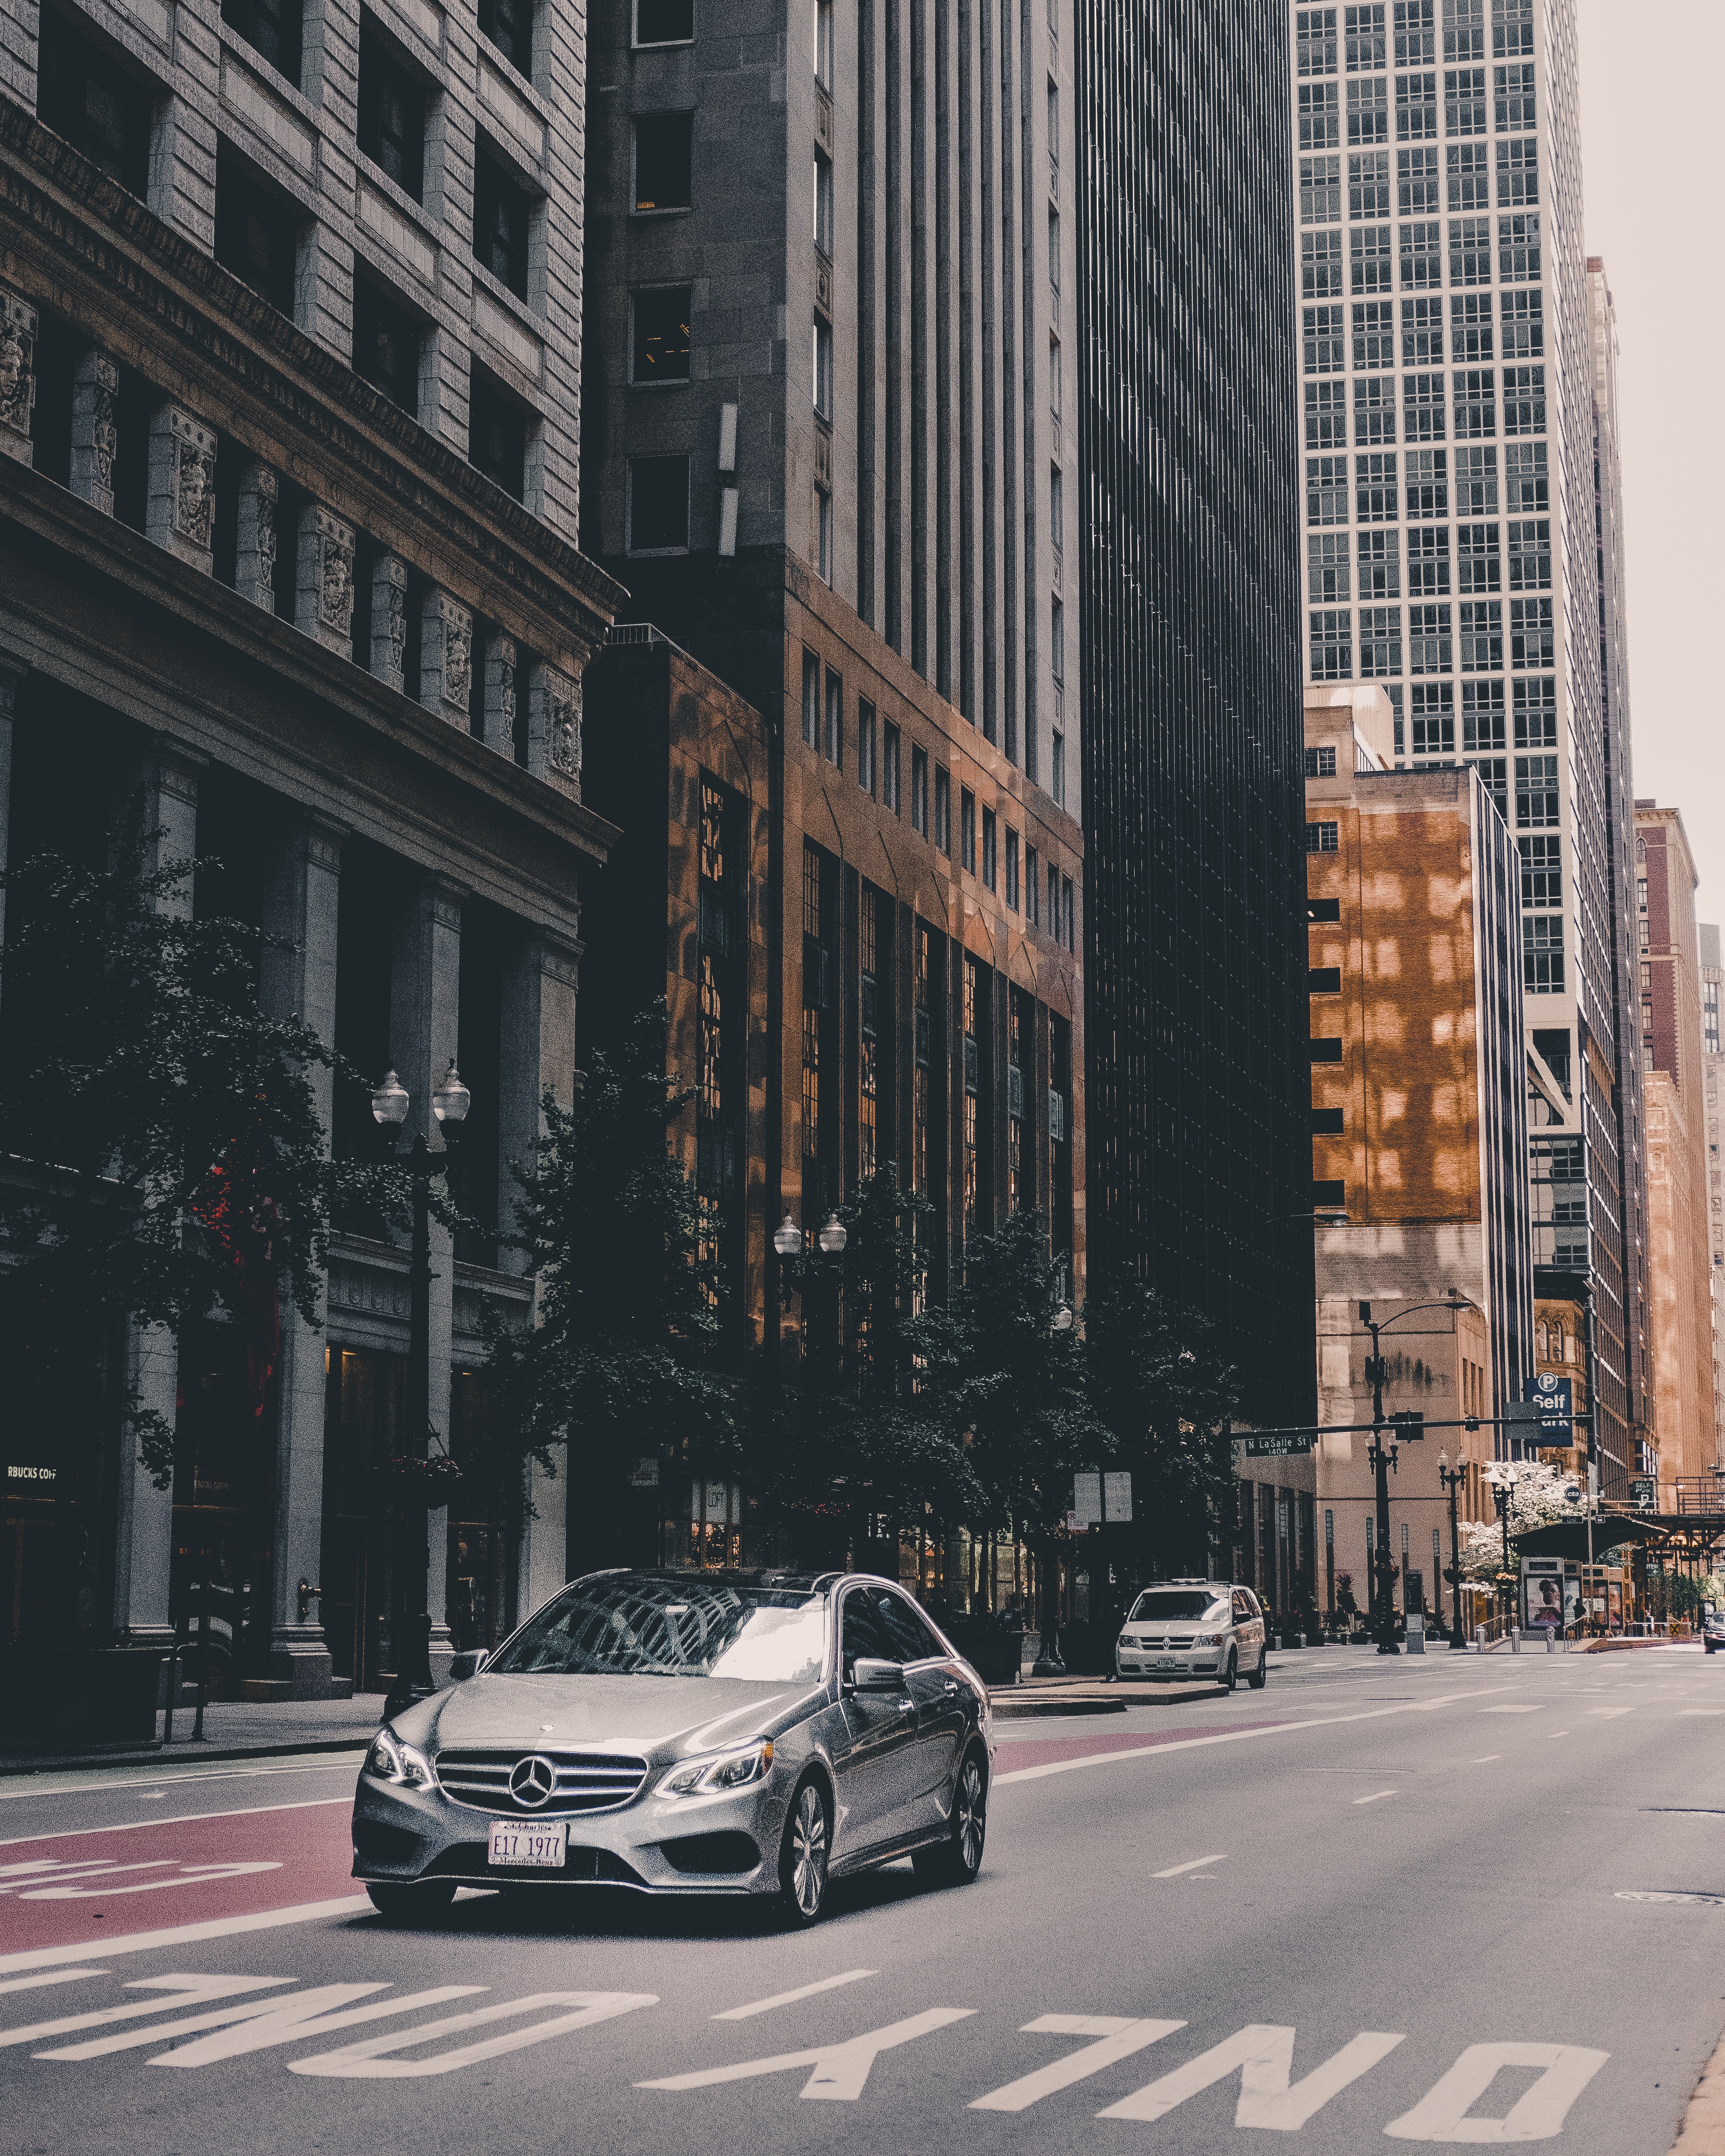 united states, architecture, usa, cars, city, car, mercedes, chicago Full HD